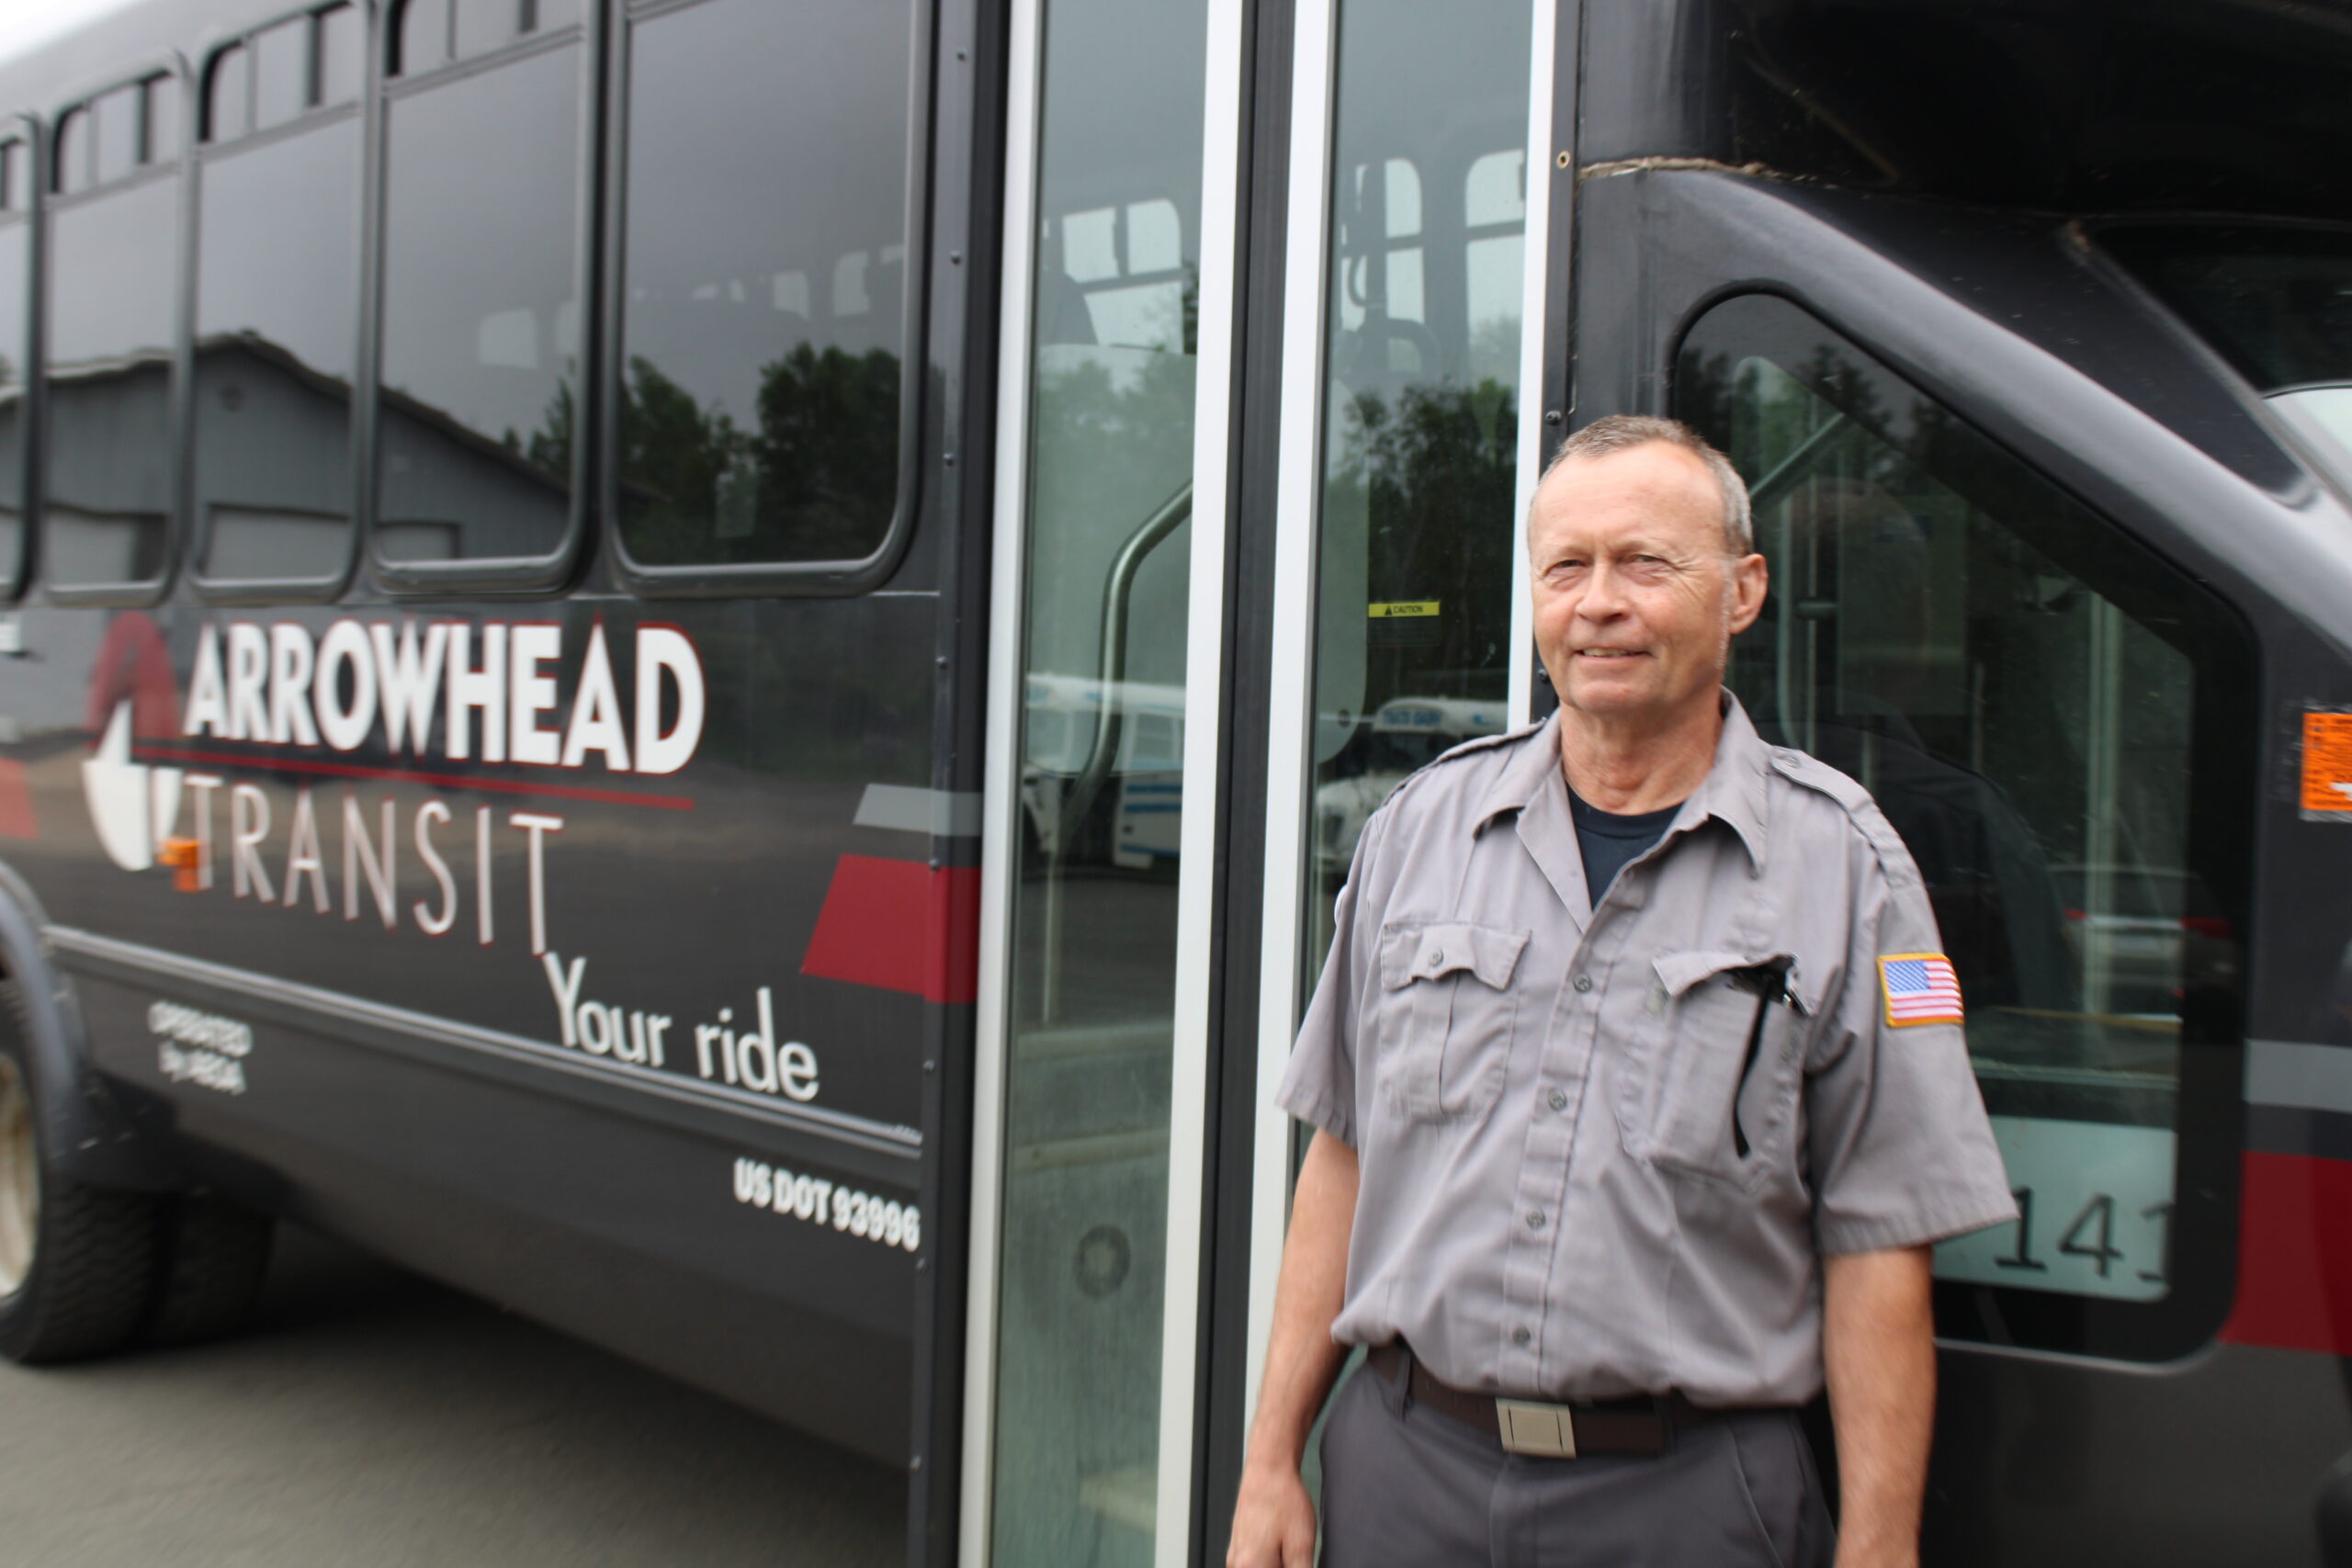 A bus driver stands outside of our handicap, ADA compliant bus and welcomes you on board with a smile.